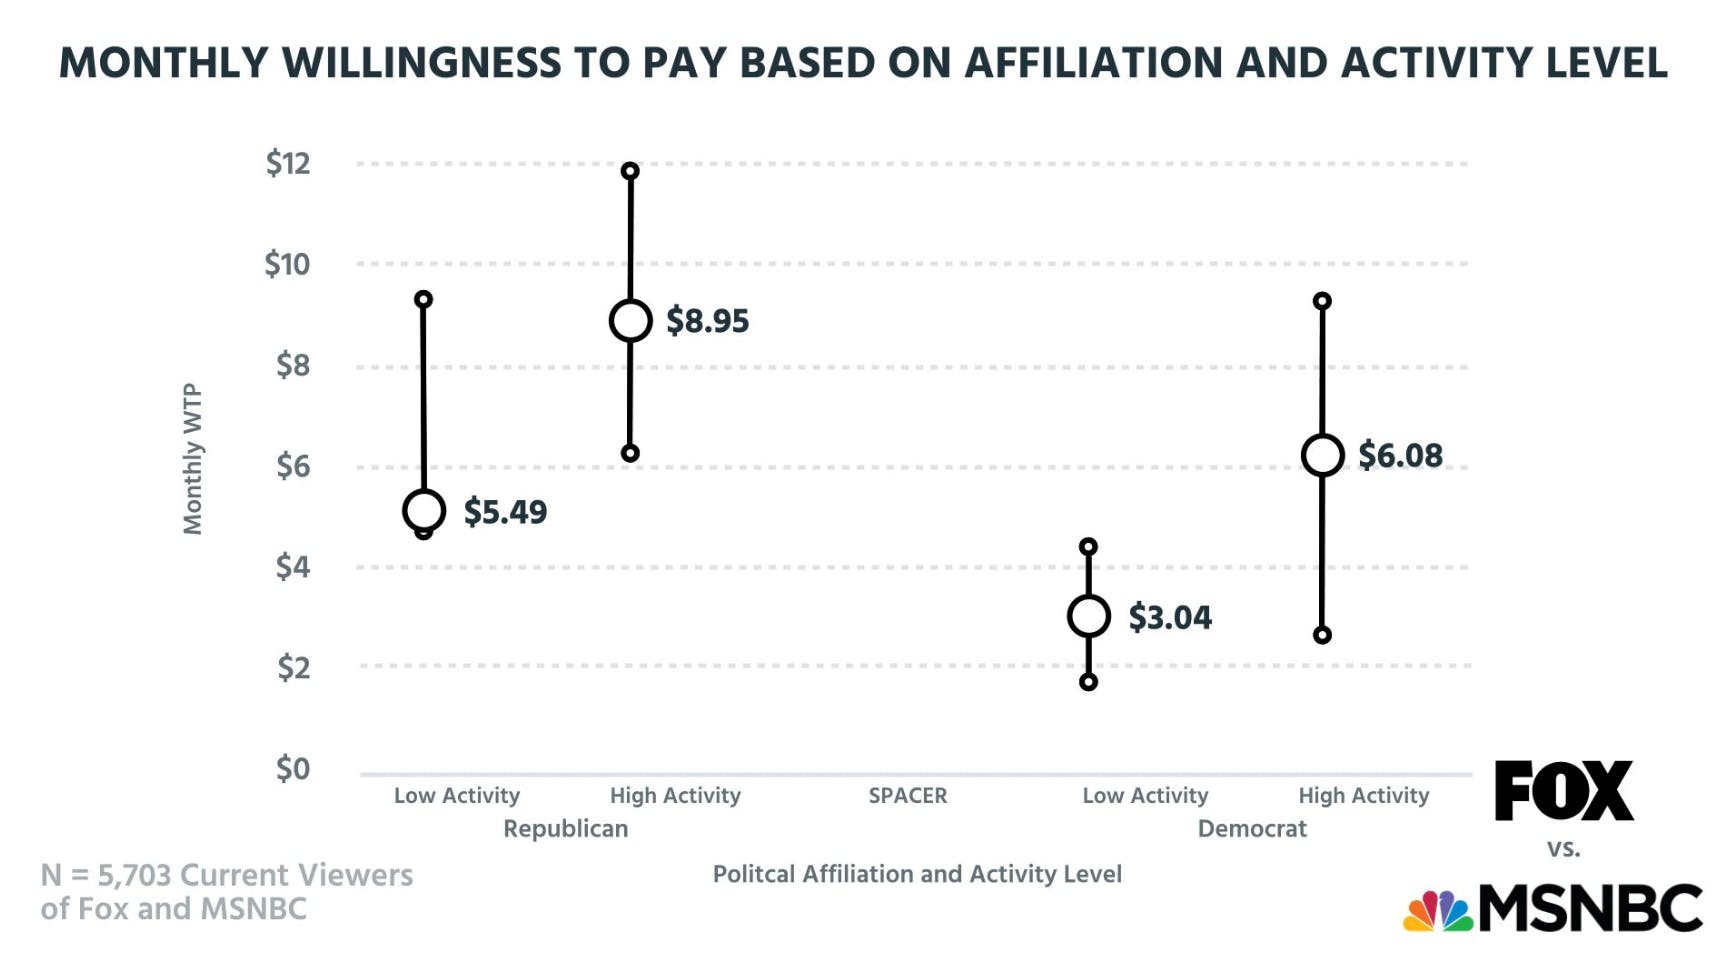 Monthly willingness to pay based on political affiliation and activity